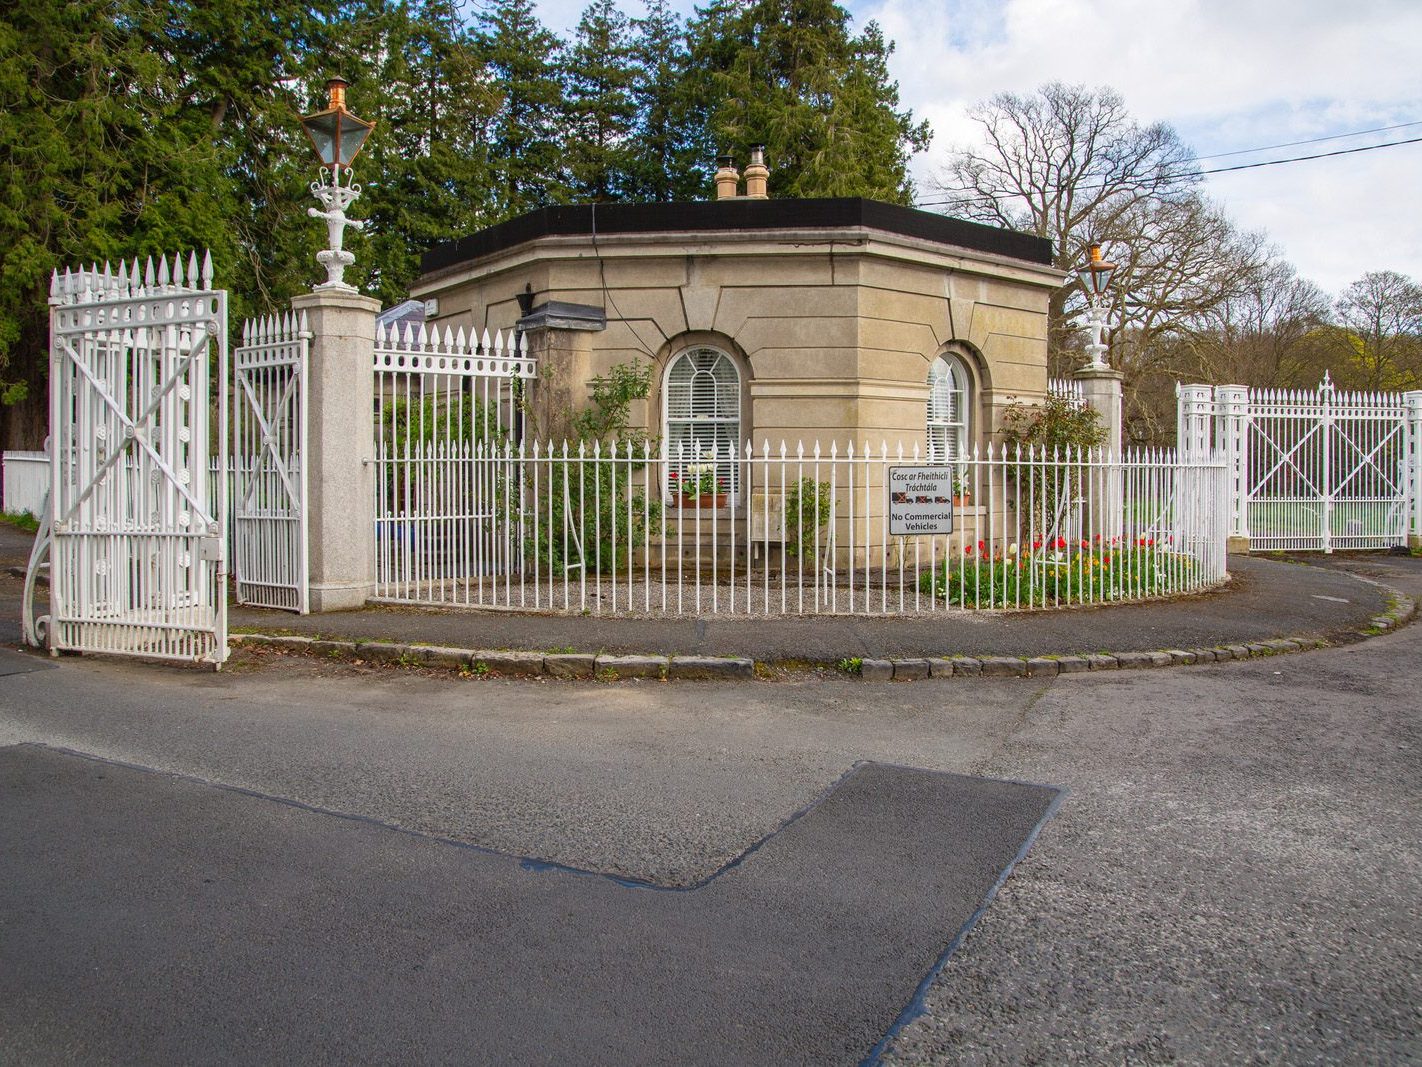 KNOCKMAROON GATE LODGE PHOENIX PARK [AND NEARBY]-223721-1